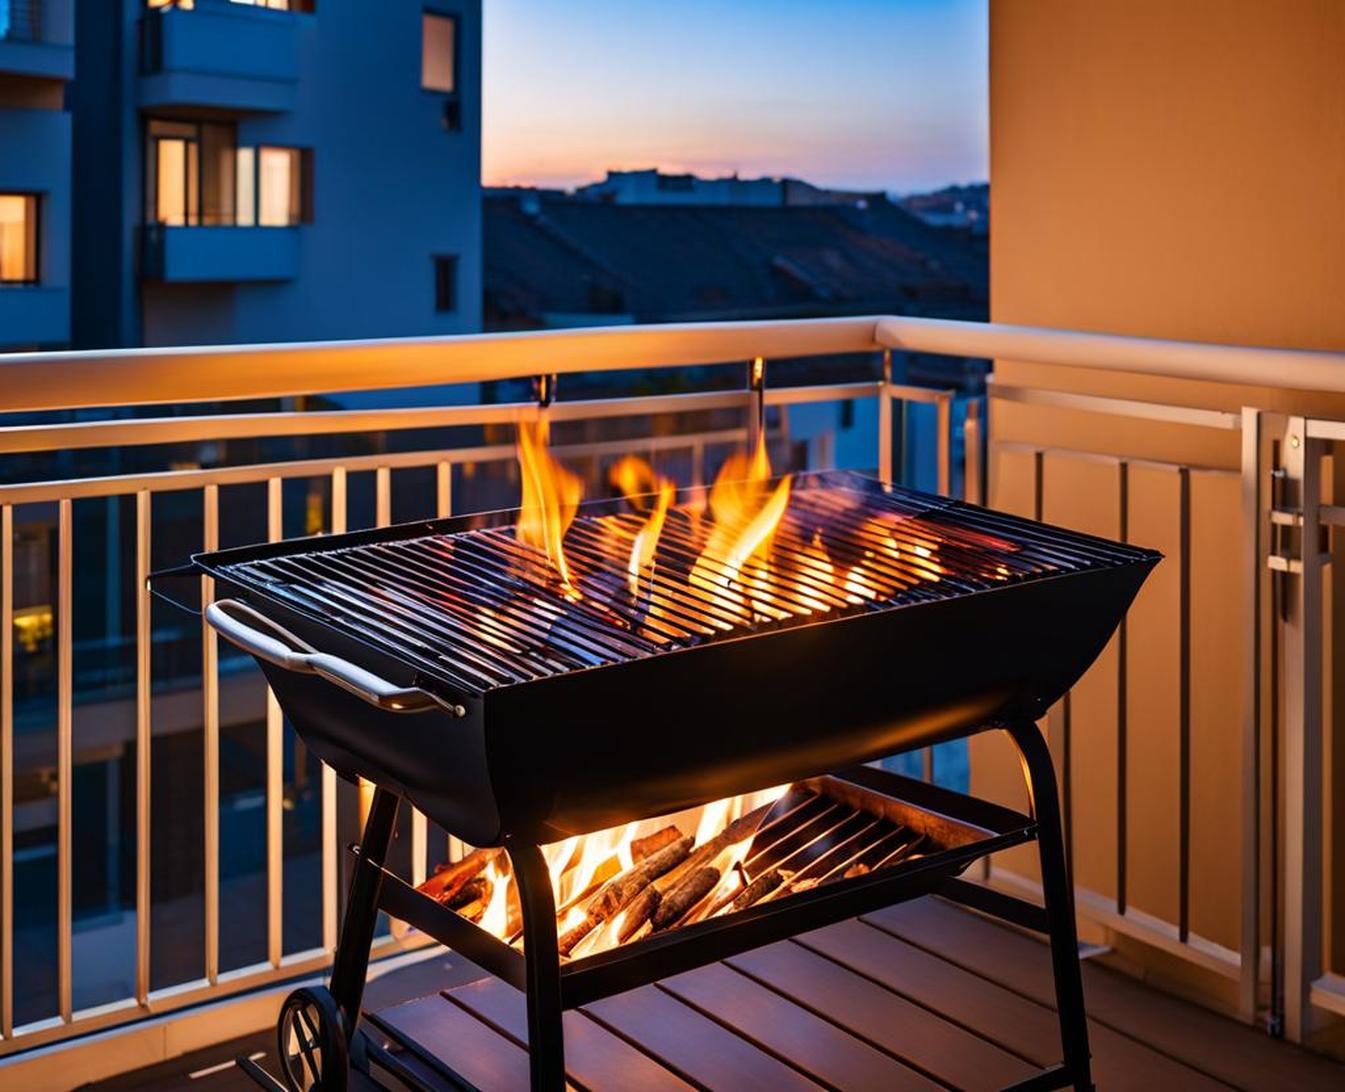 grilling on a balcony